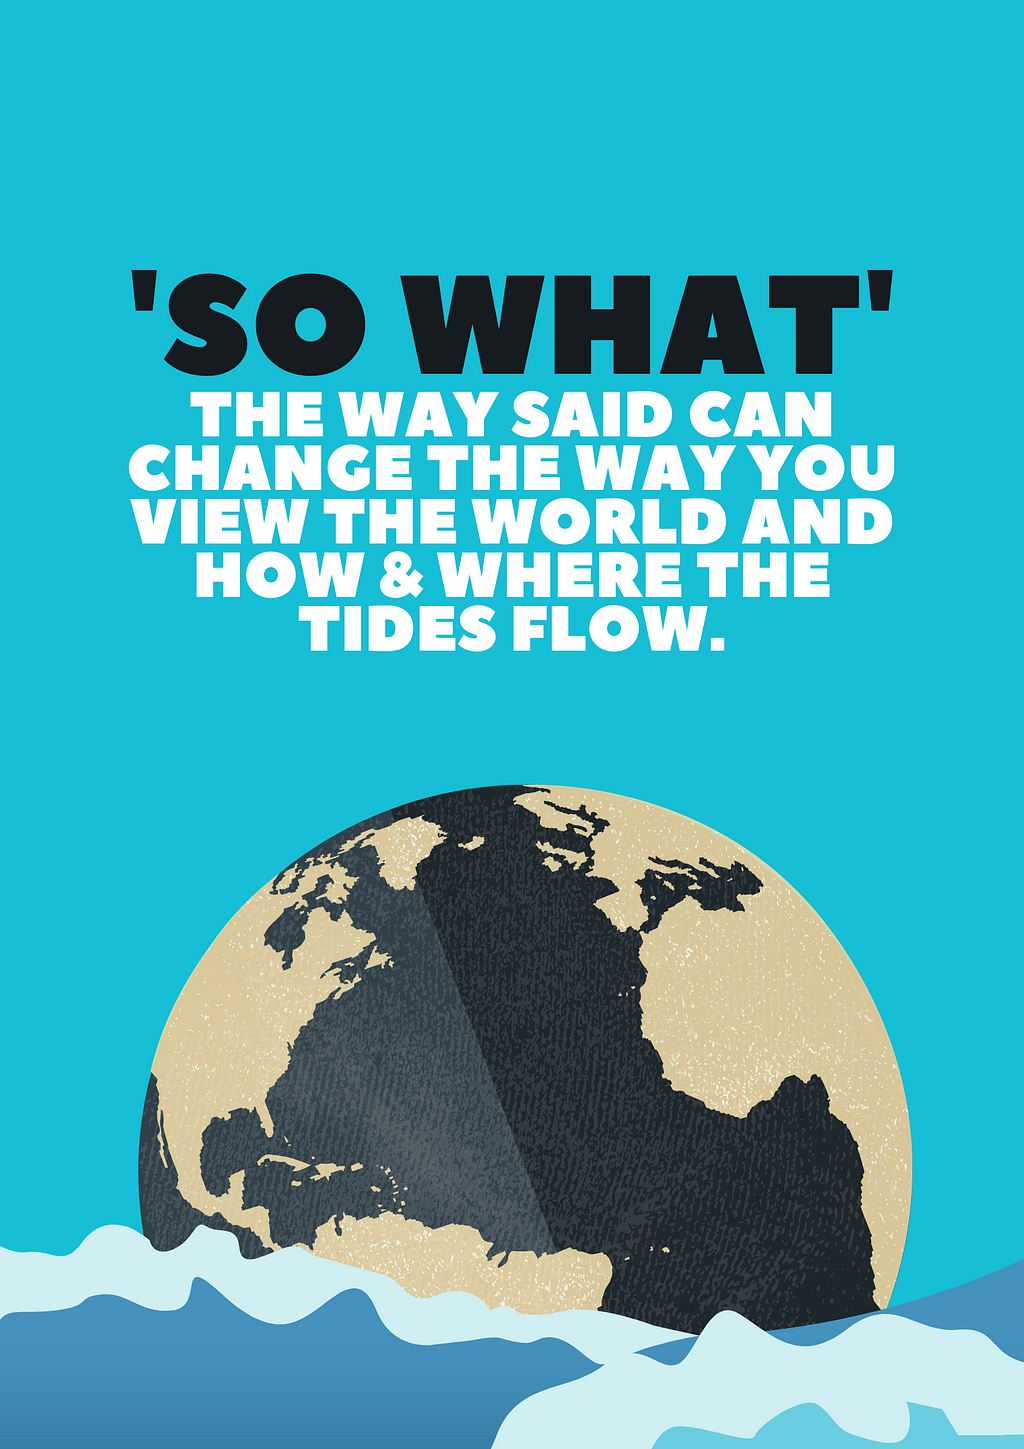 ‘So what’ the way said can change the way you view the world and how & where the tides flow.